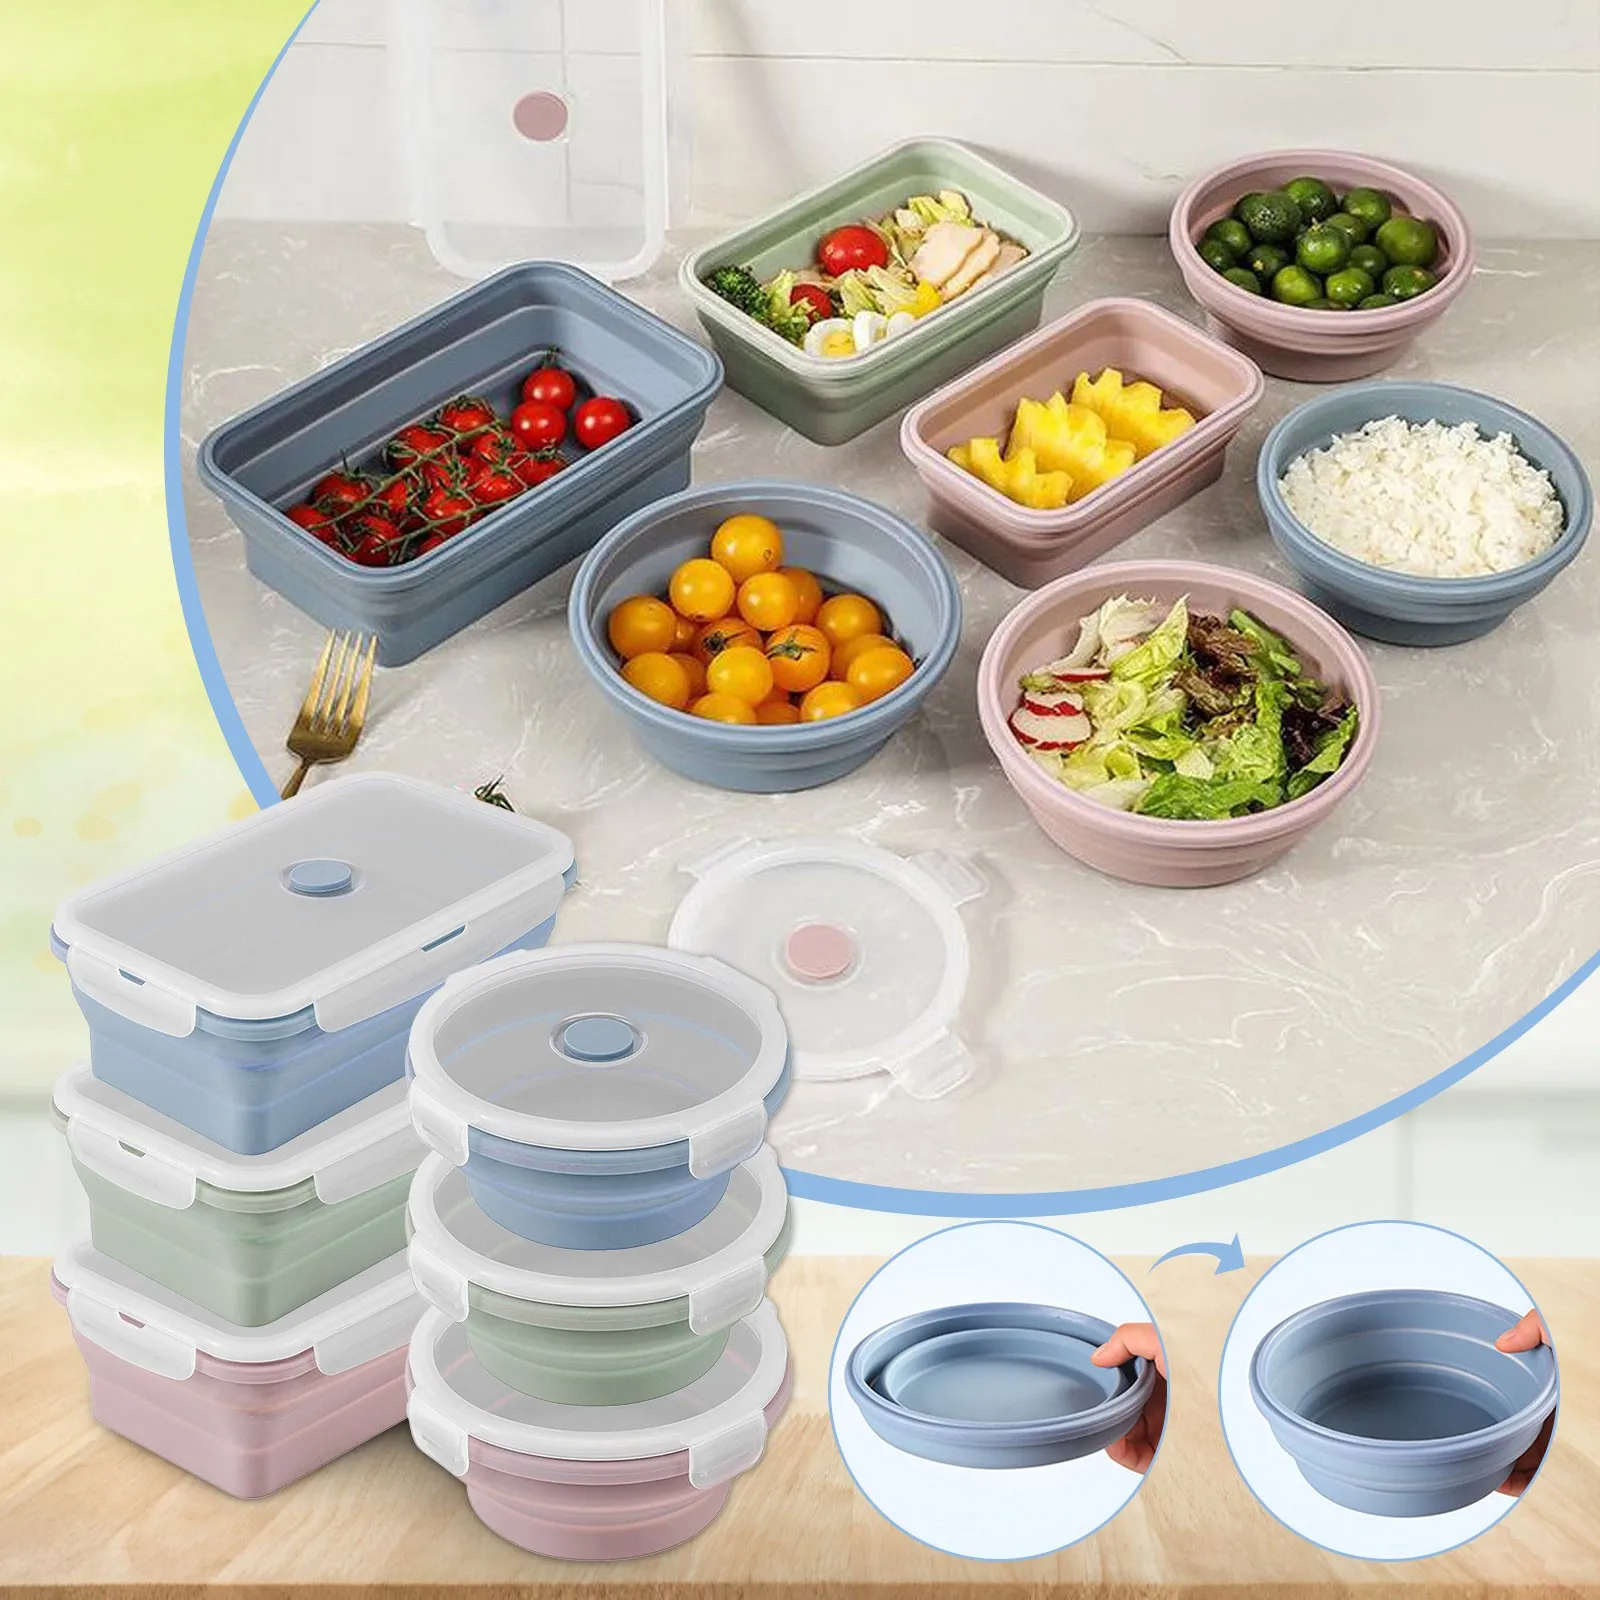 https://ae01.alicdn.com/kf/Sdd319532037444dda0d8dbdd005d07c0T/350ml-Silicone-Collapsible-Lunch-Box-Food-Storage-Container-Microwavable-Portable-Bowl-Picnic-Camping-Sealed-Fruit-Bento.jpg